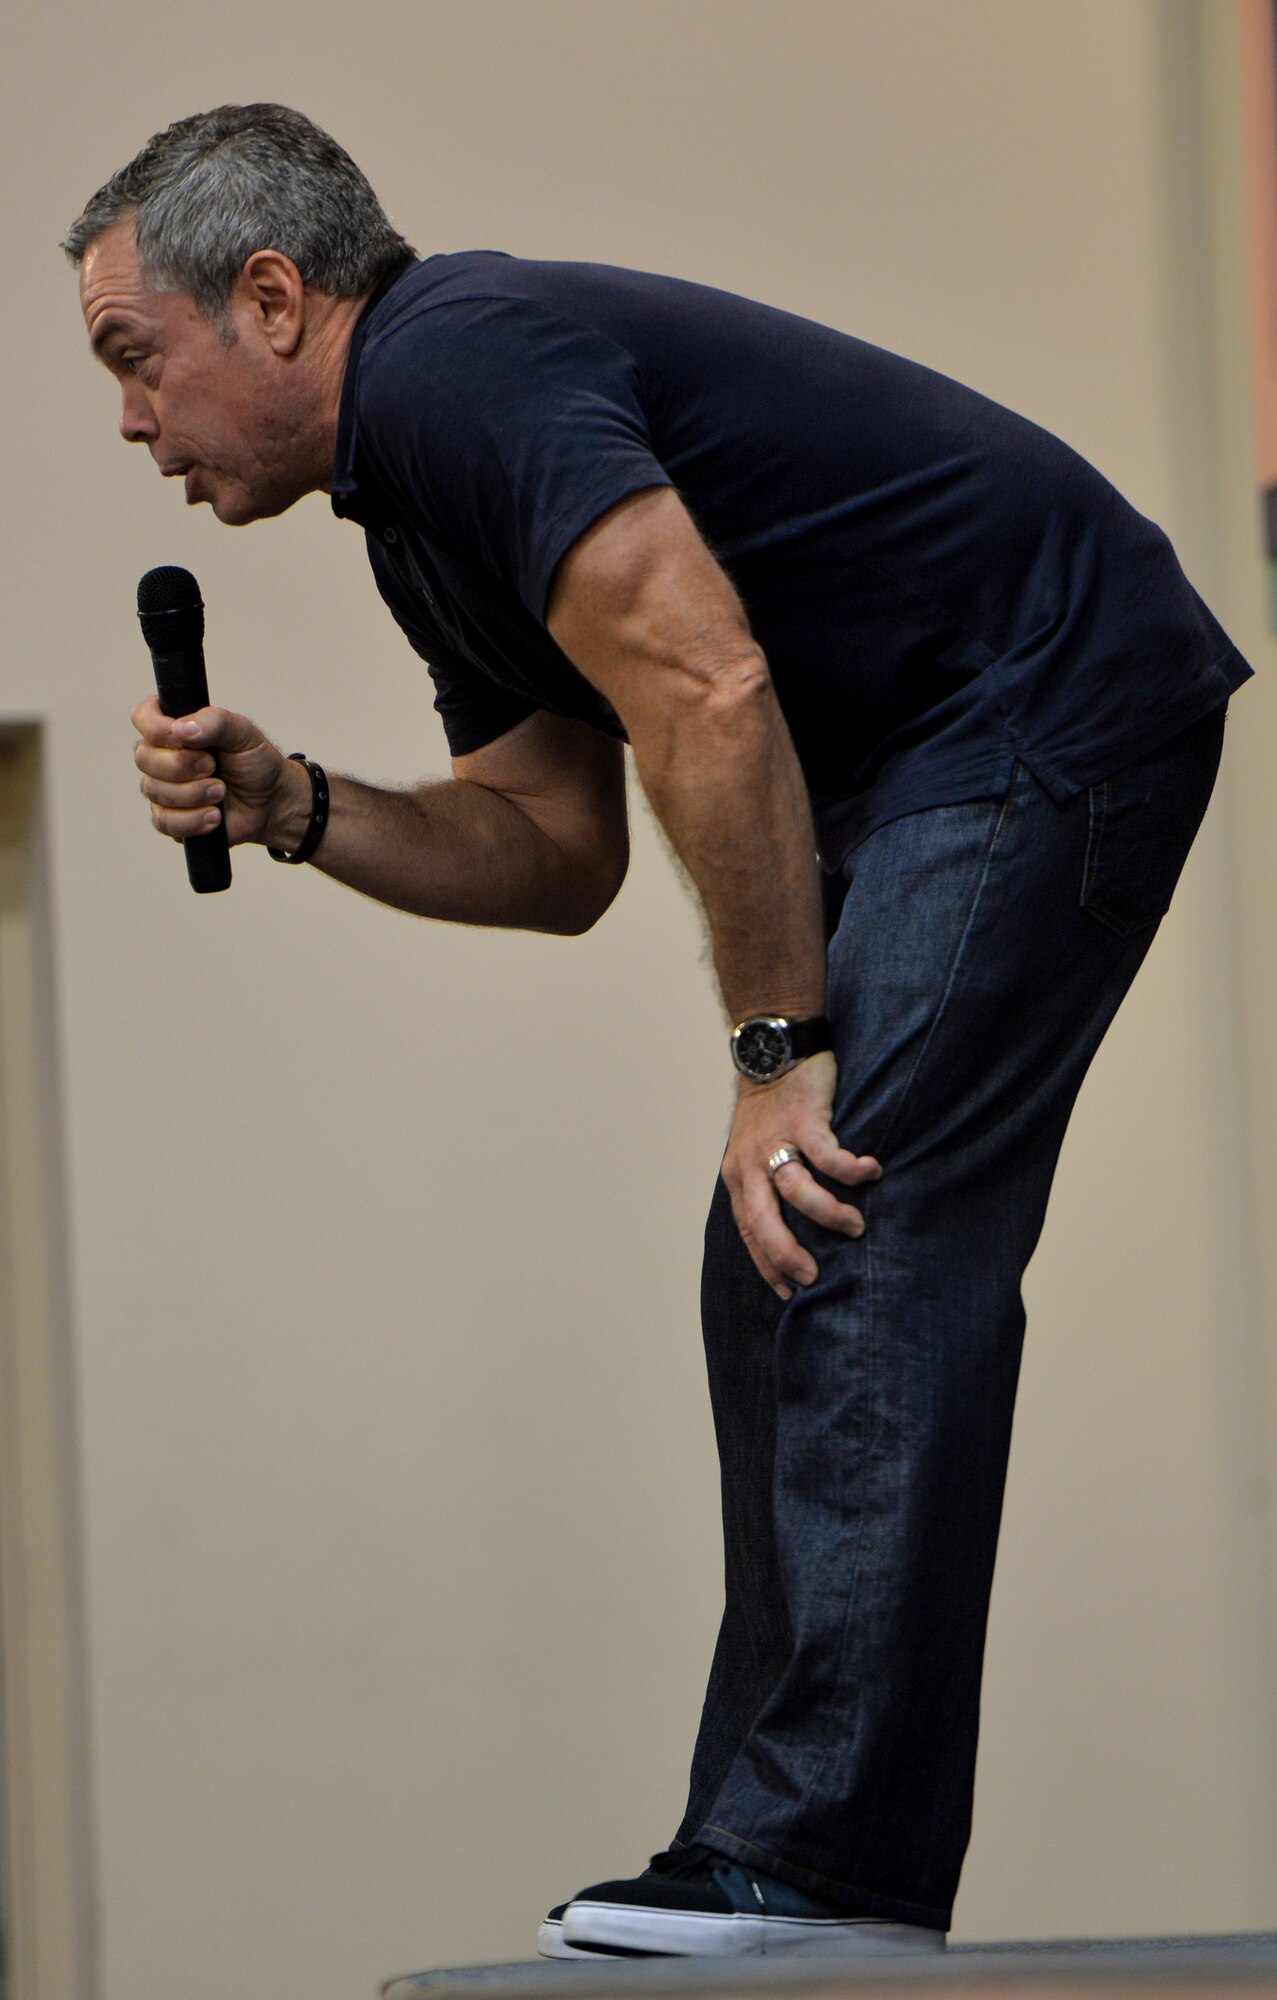 Comedian Bernie McGrenahan speaks during resiliency training at King Auditorium, Hurlburt Field, Fla., Sept. 24, 2014. The training focused on the importance of resiliency with a humor filled presentation. (U.S. Air Force photo/Senior Airman Christopher Callaway)  